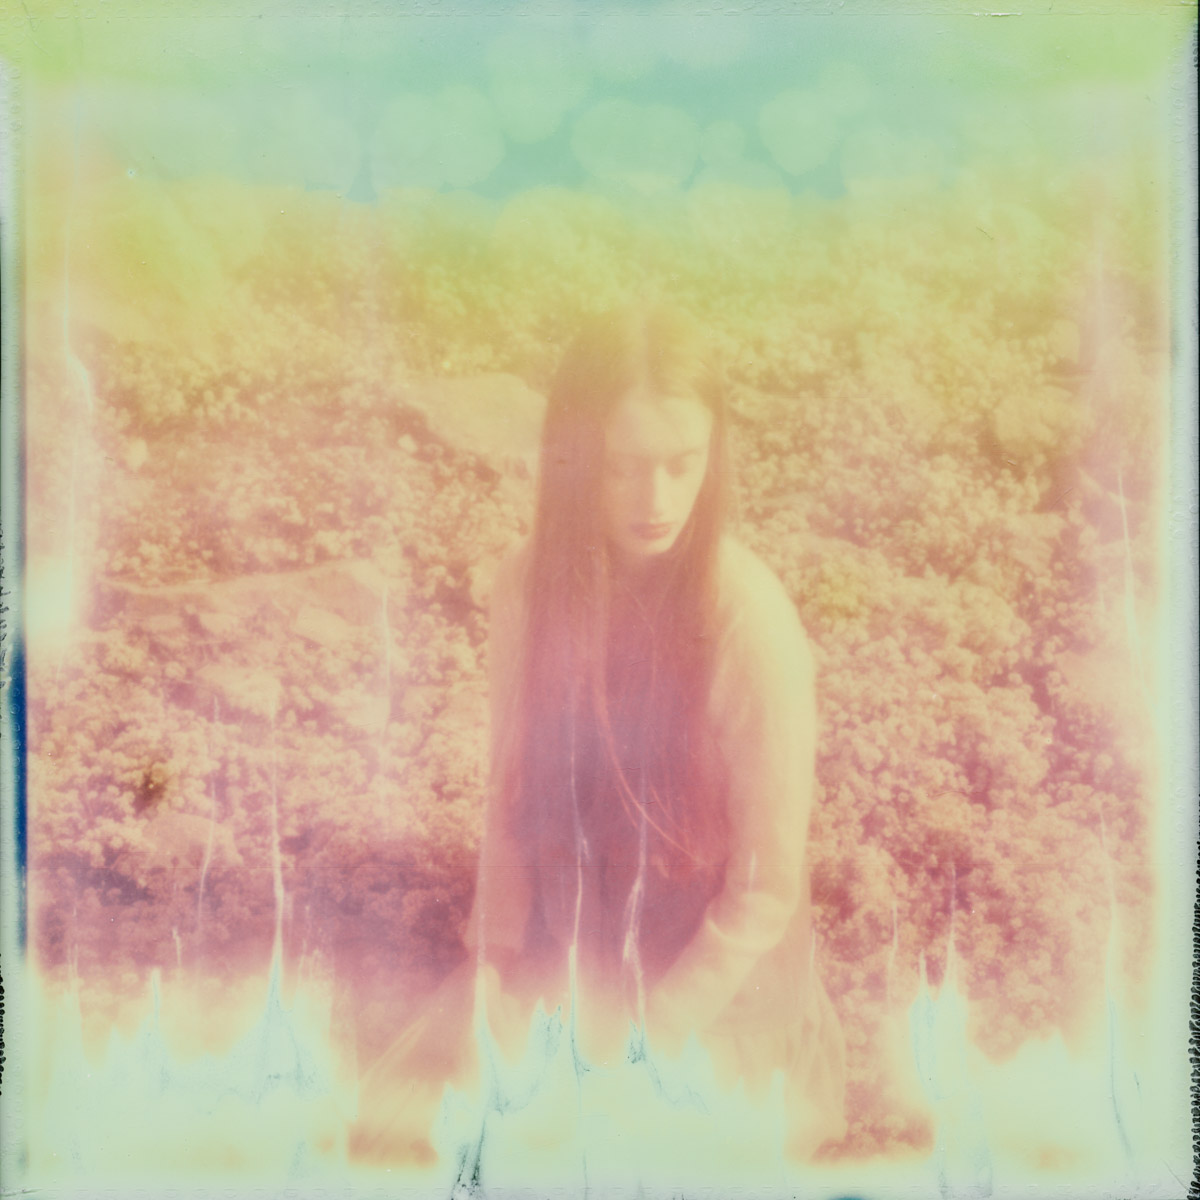 A scratched and faded Polaroid taken in the Scottish countryside with Sula Clothing.